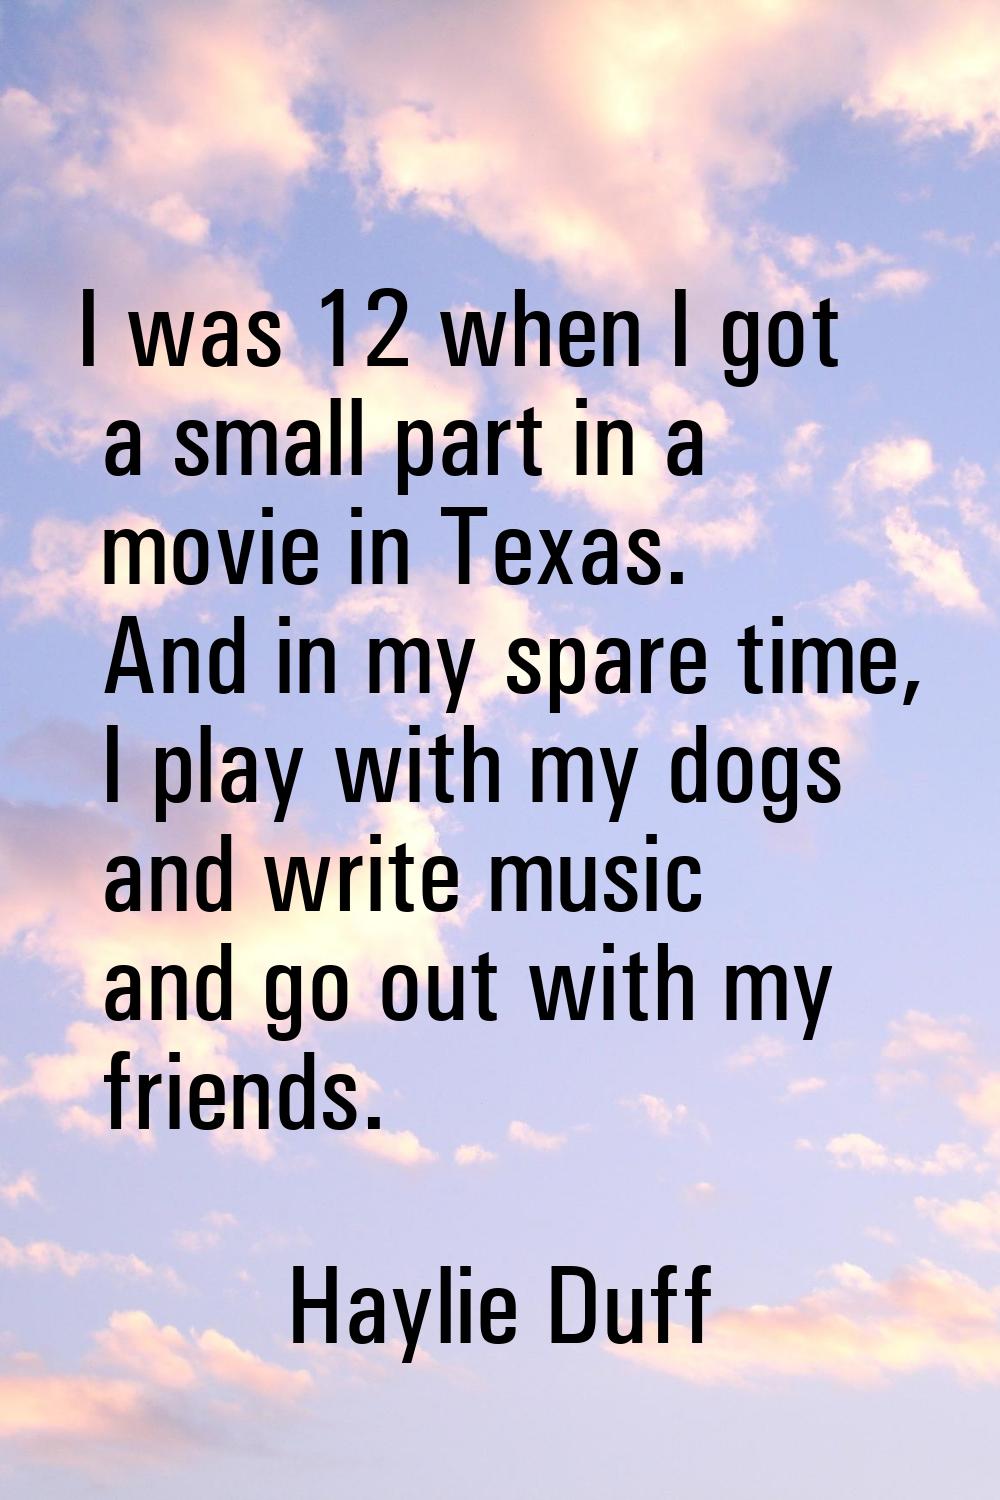 I was 12 when I got a small part in a movie in Texas. And in my spare time, I play with my dogs and